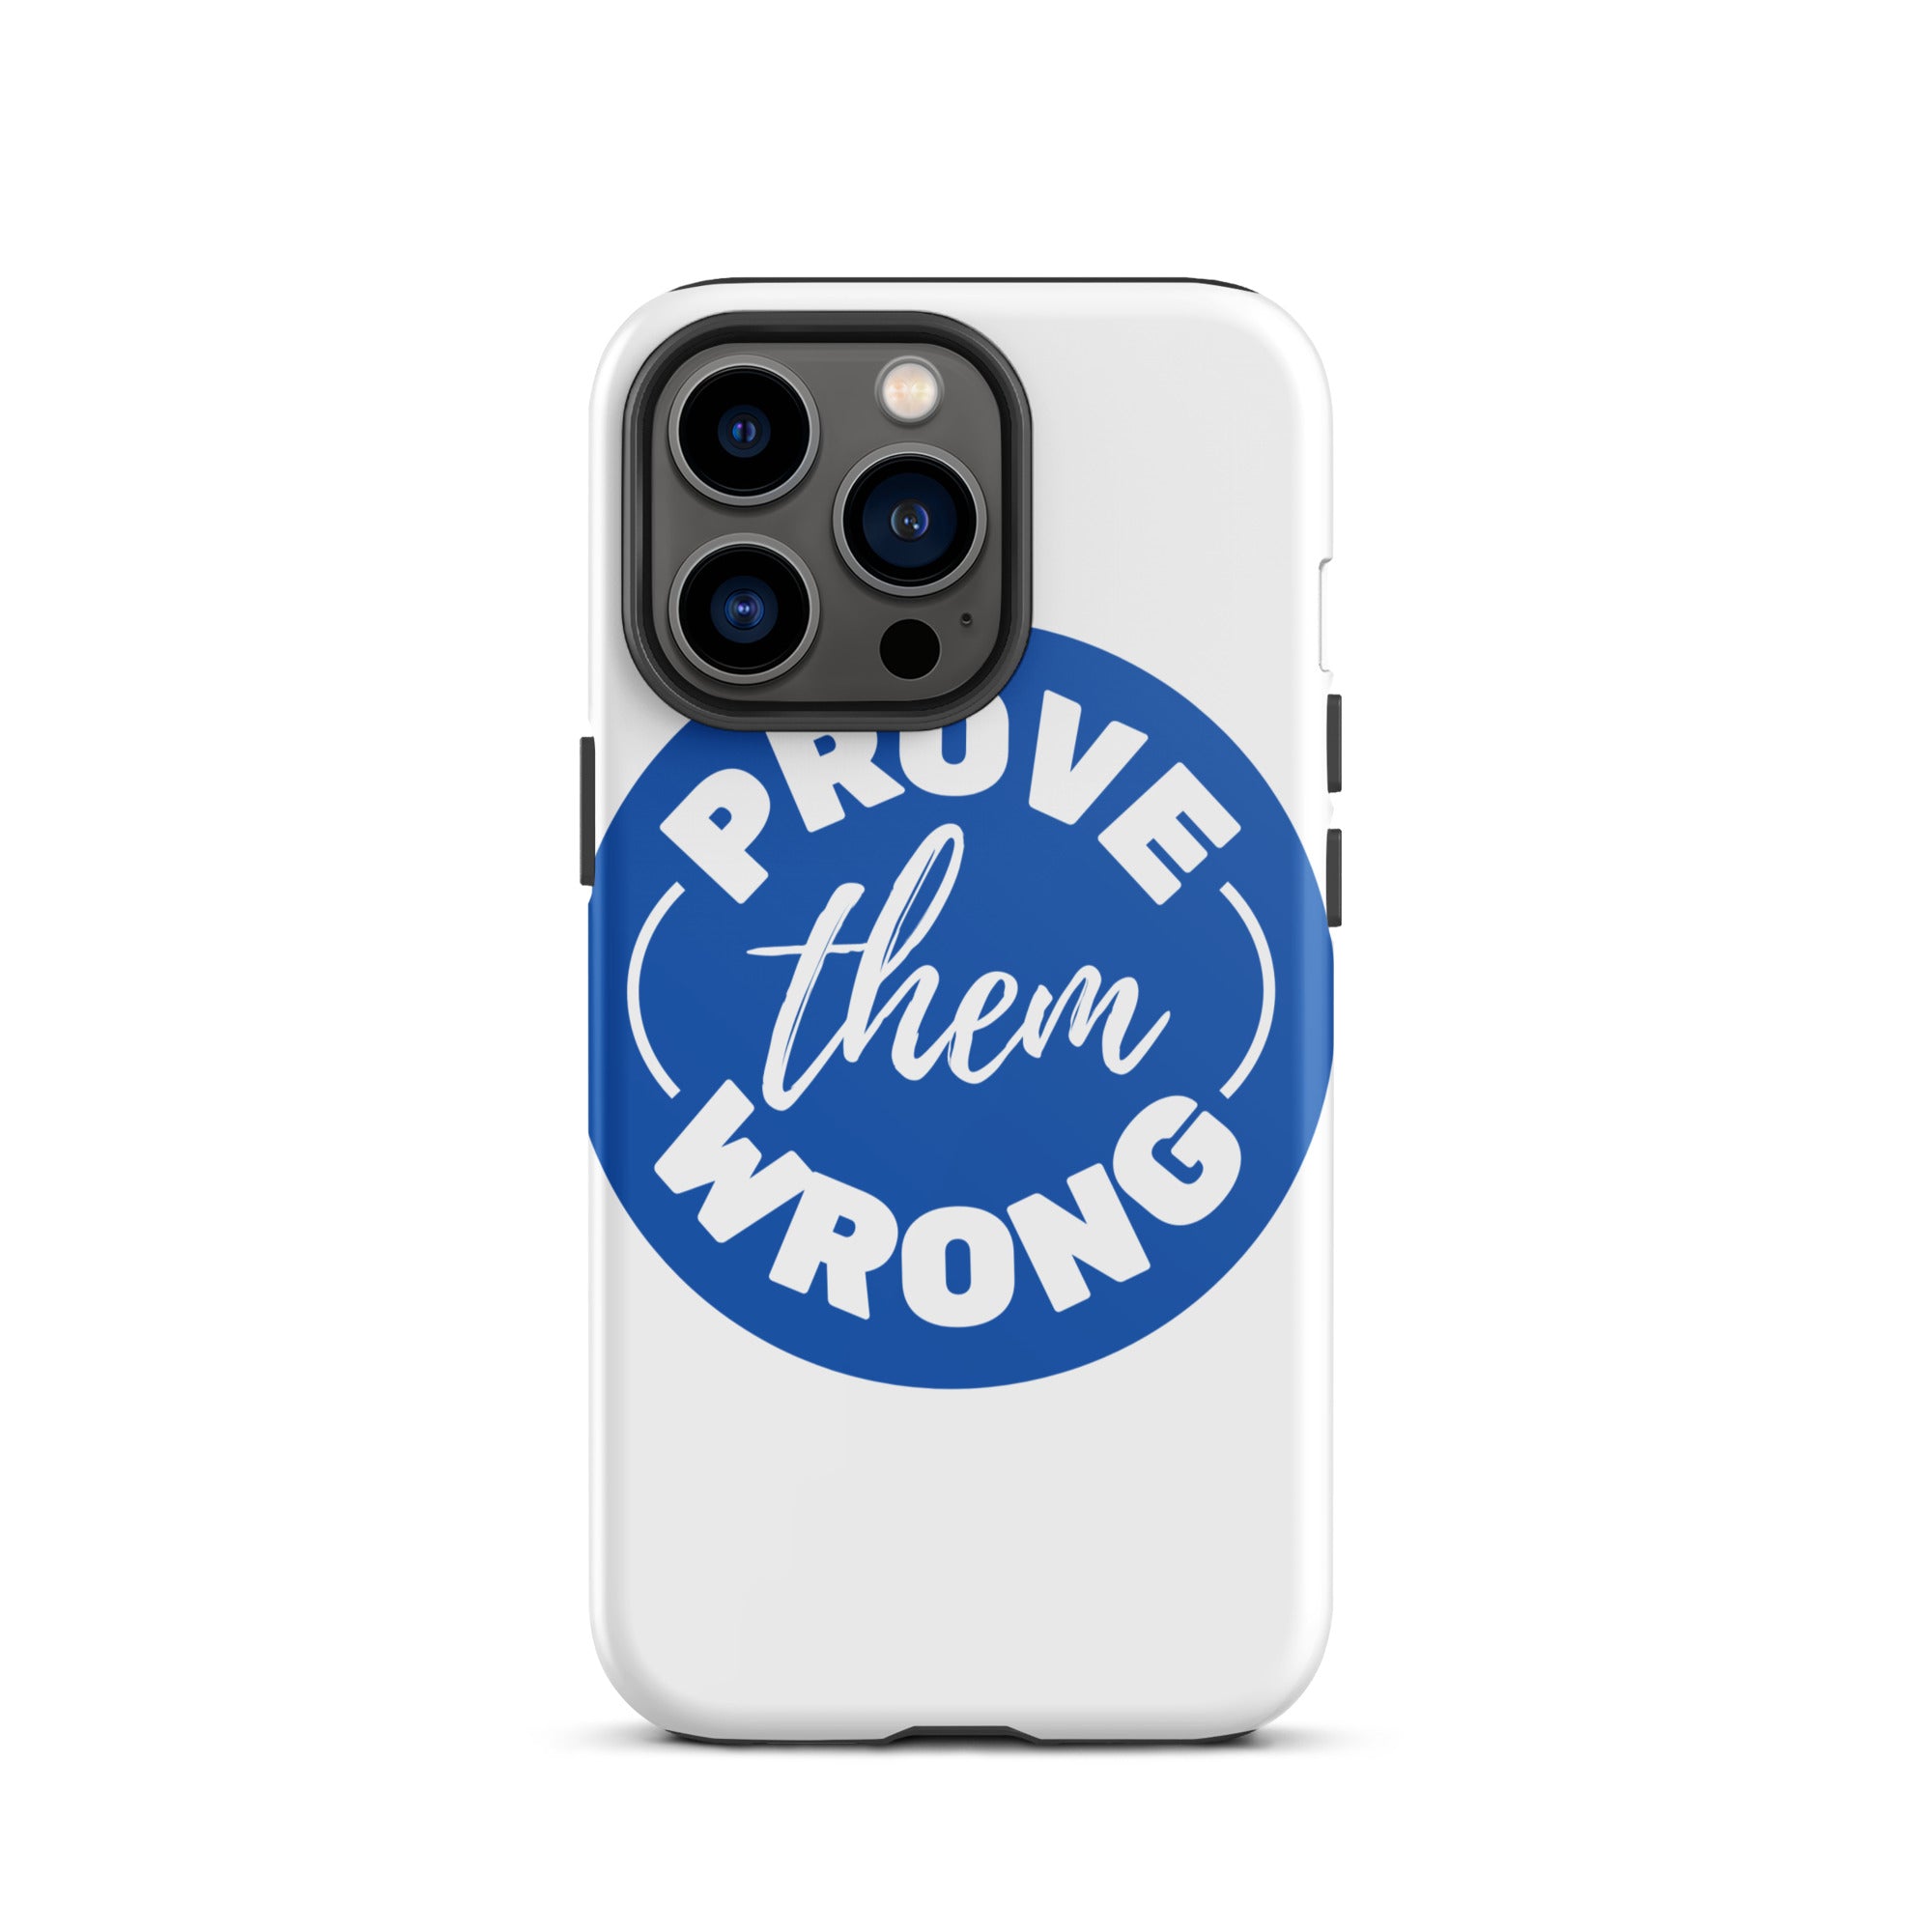 Prove Them Wrong - Tough iPhone case